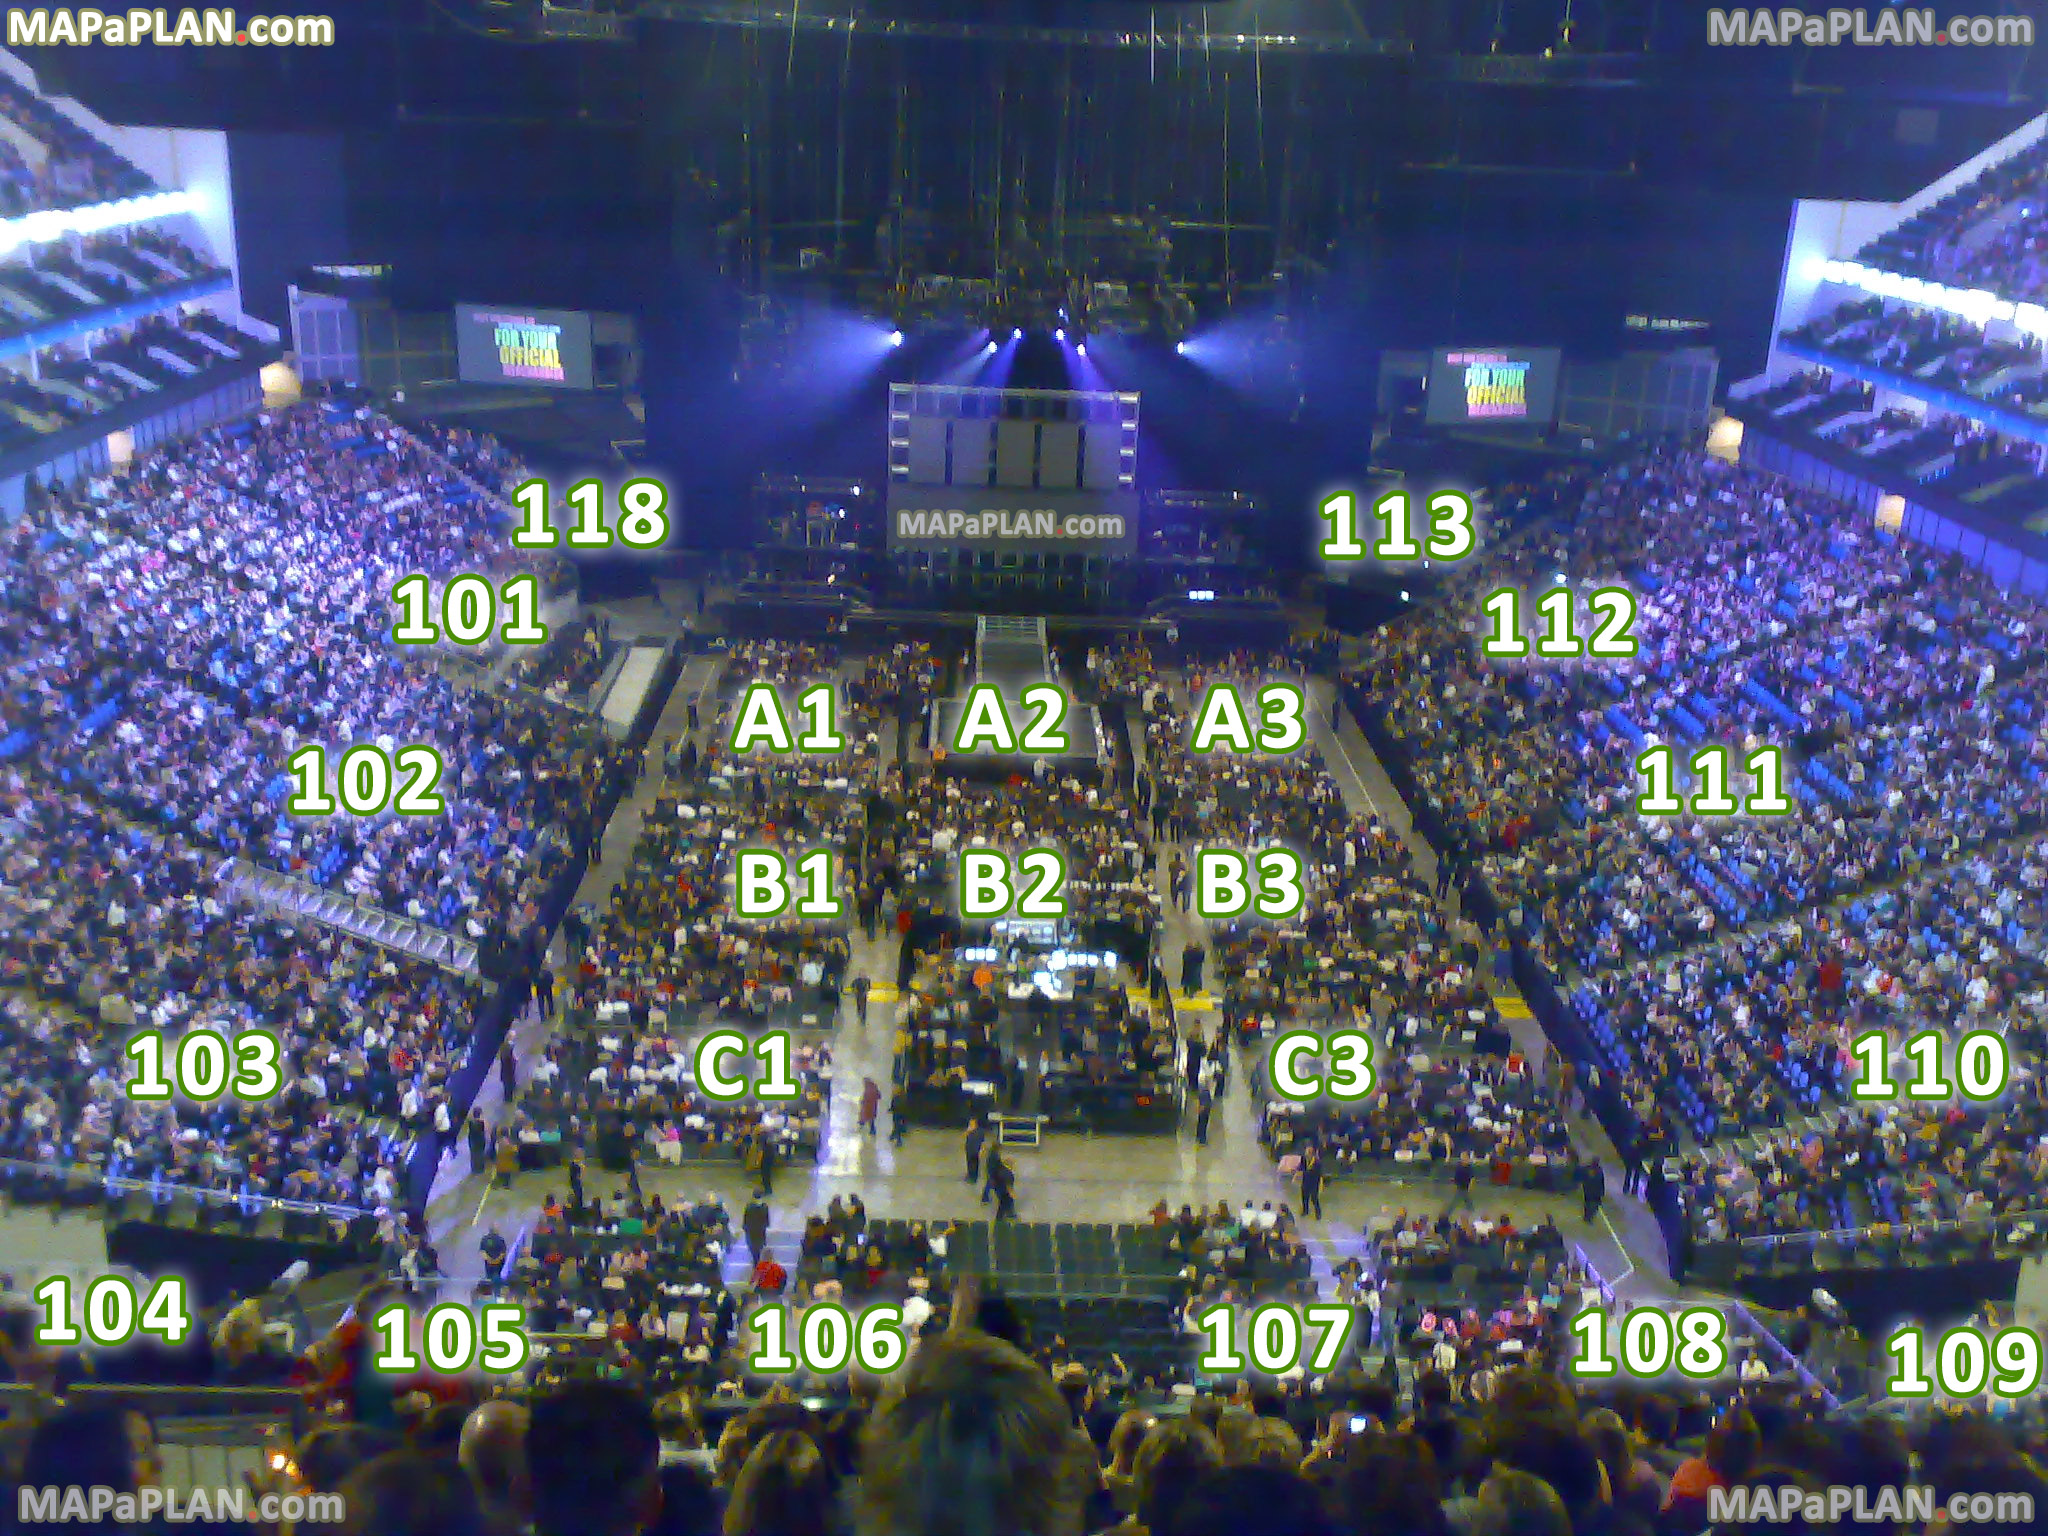 The O2 Arena London seating plan virtual tour with 360 degree panoramic view interactive layout marked up photo